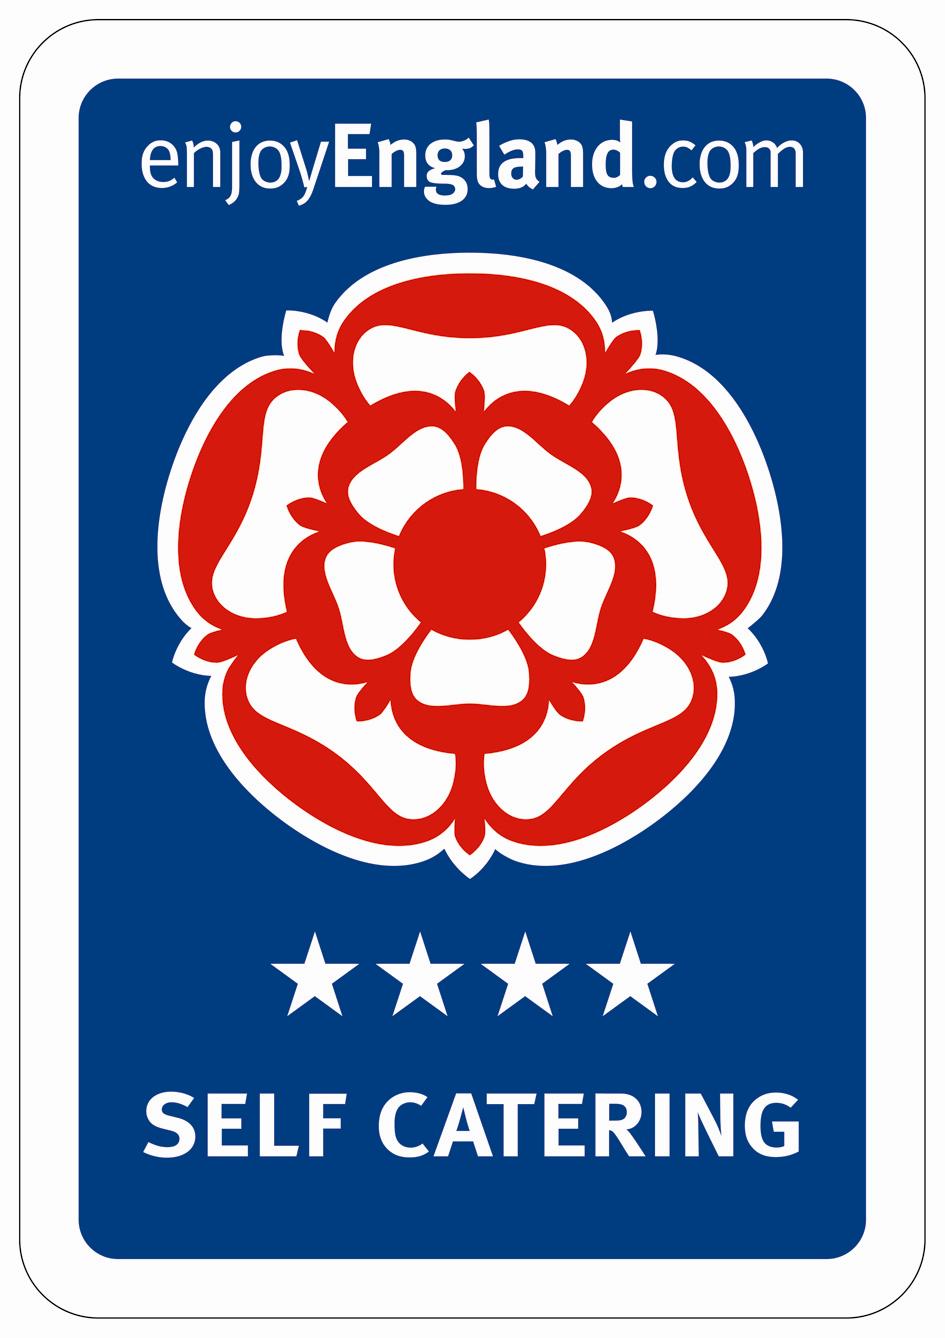 Four star self catering